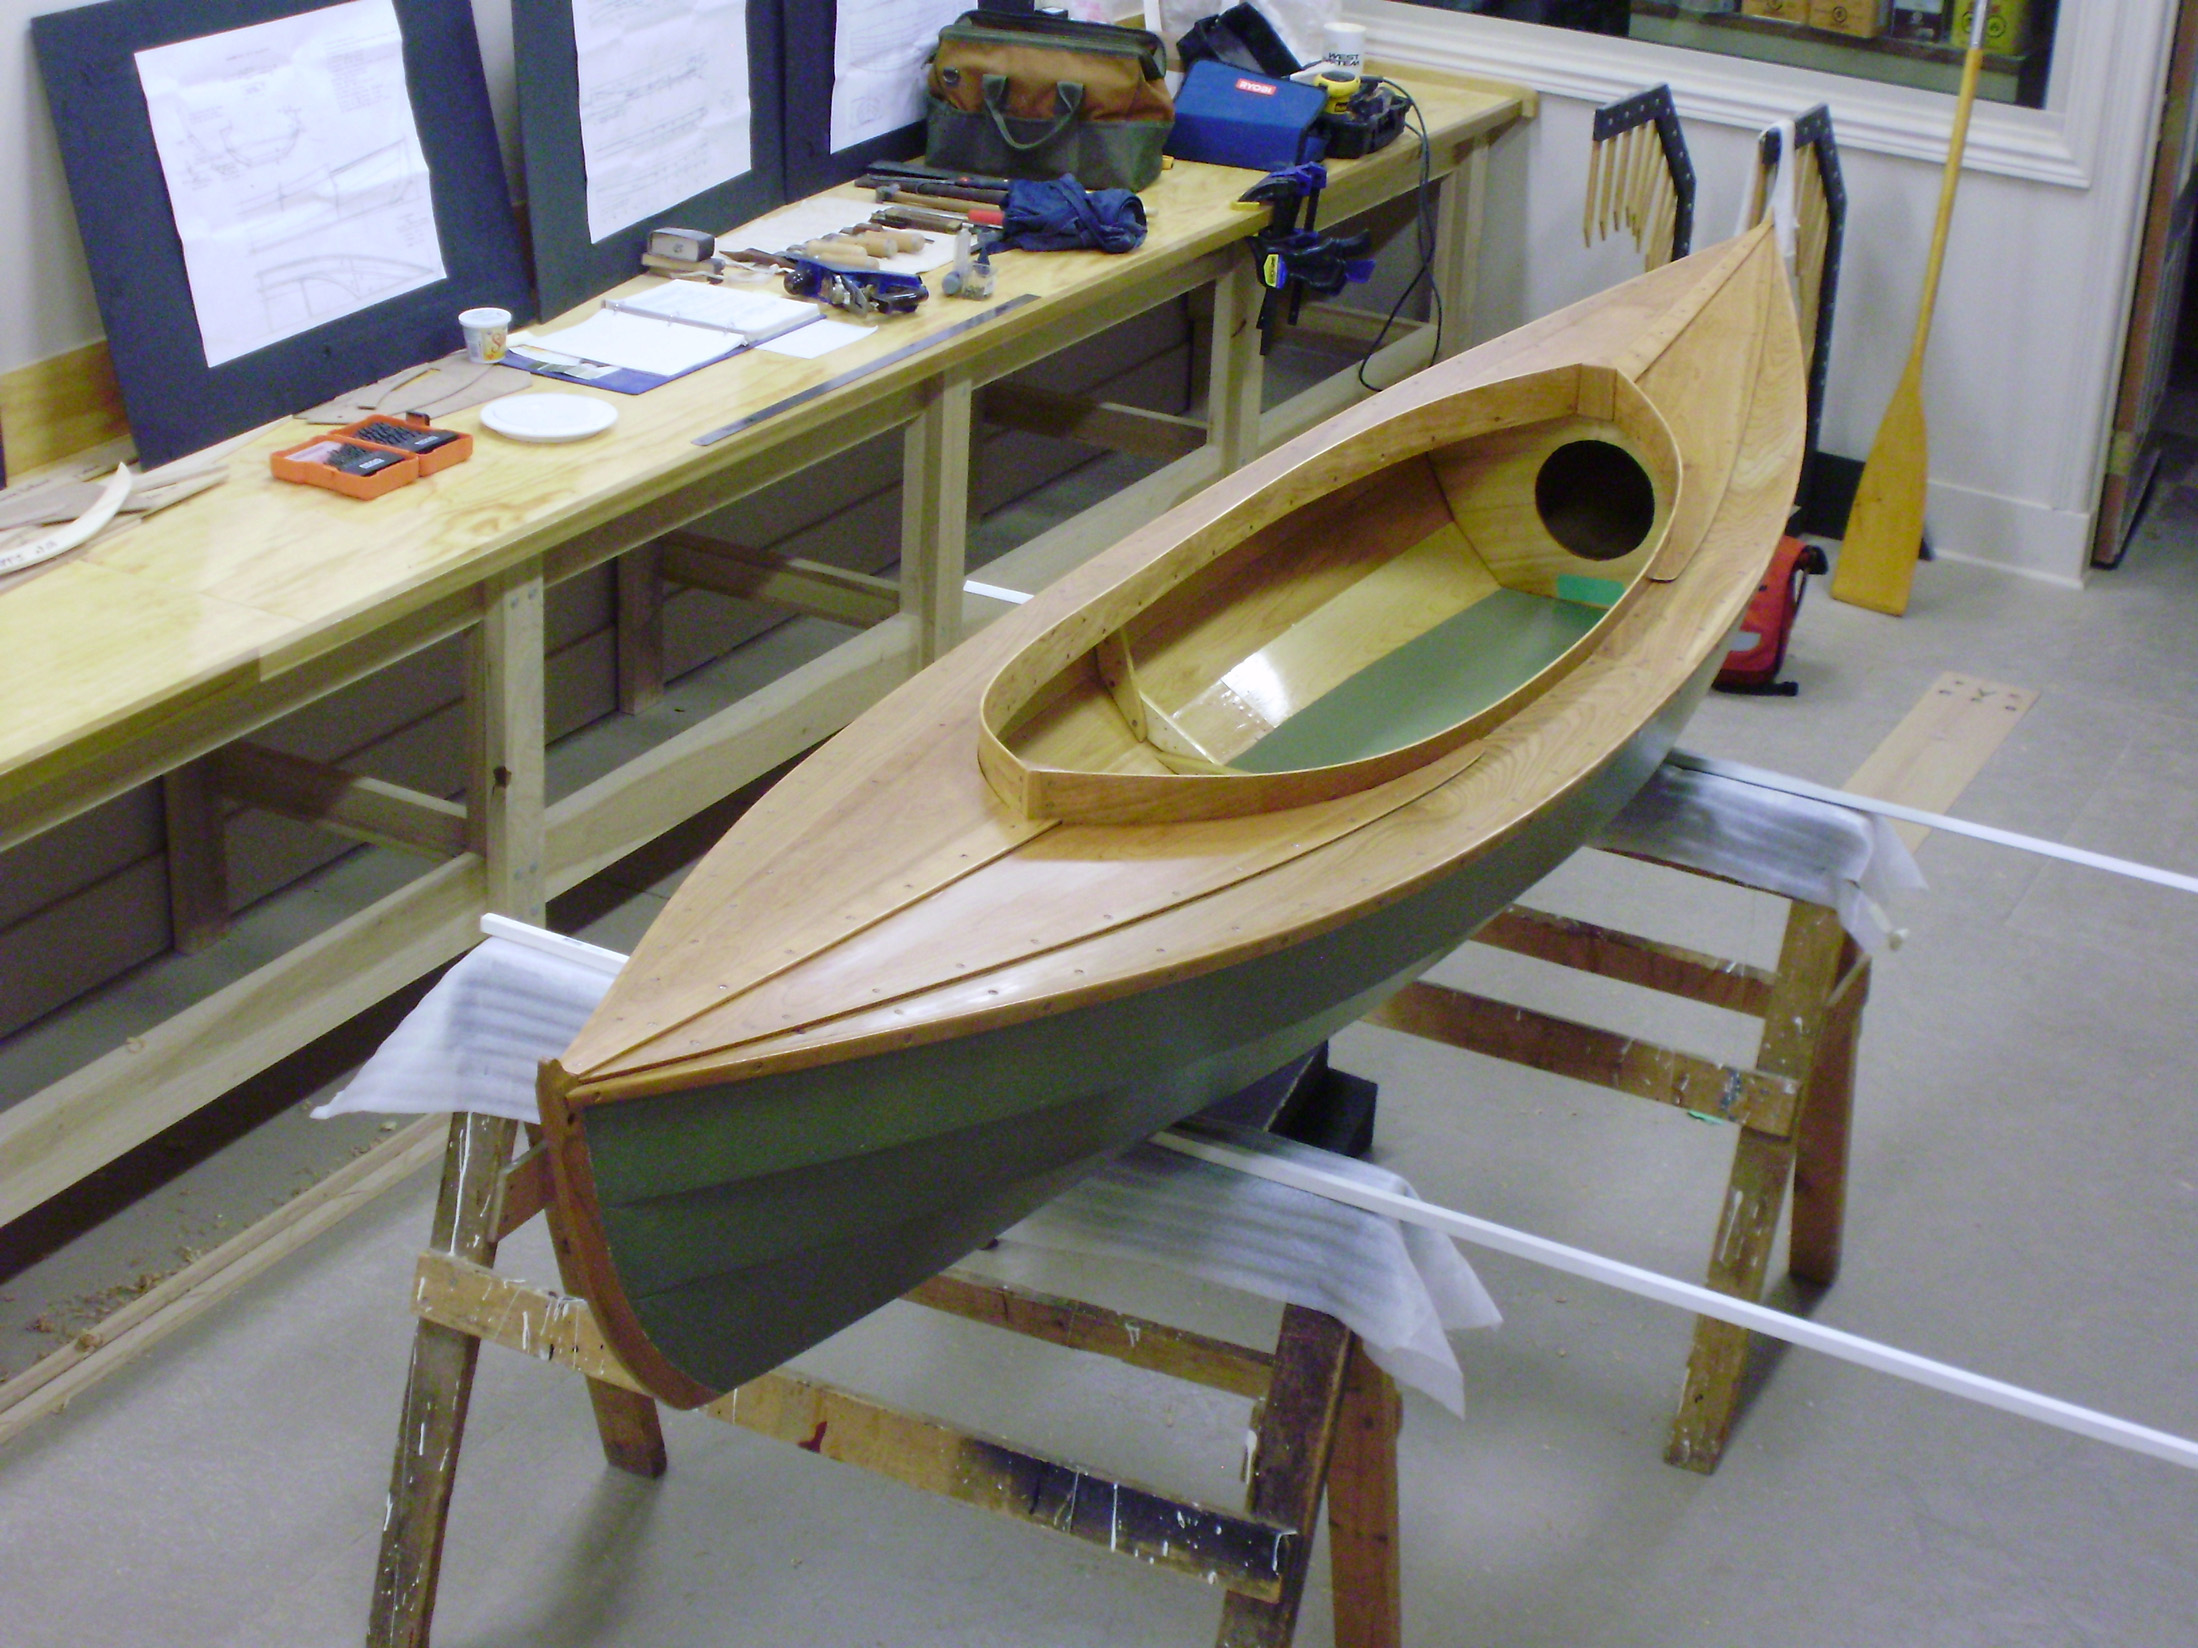 Building a Fiddlehead: Part 12 Playing With Boats